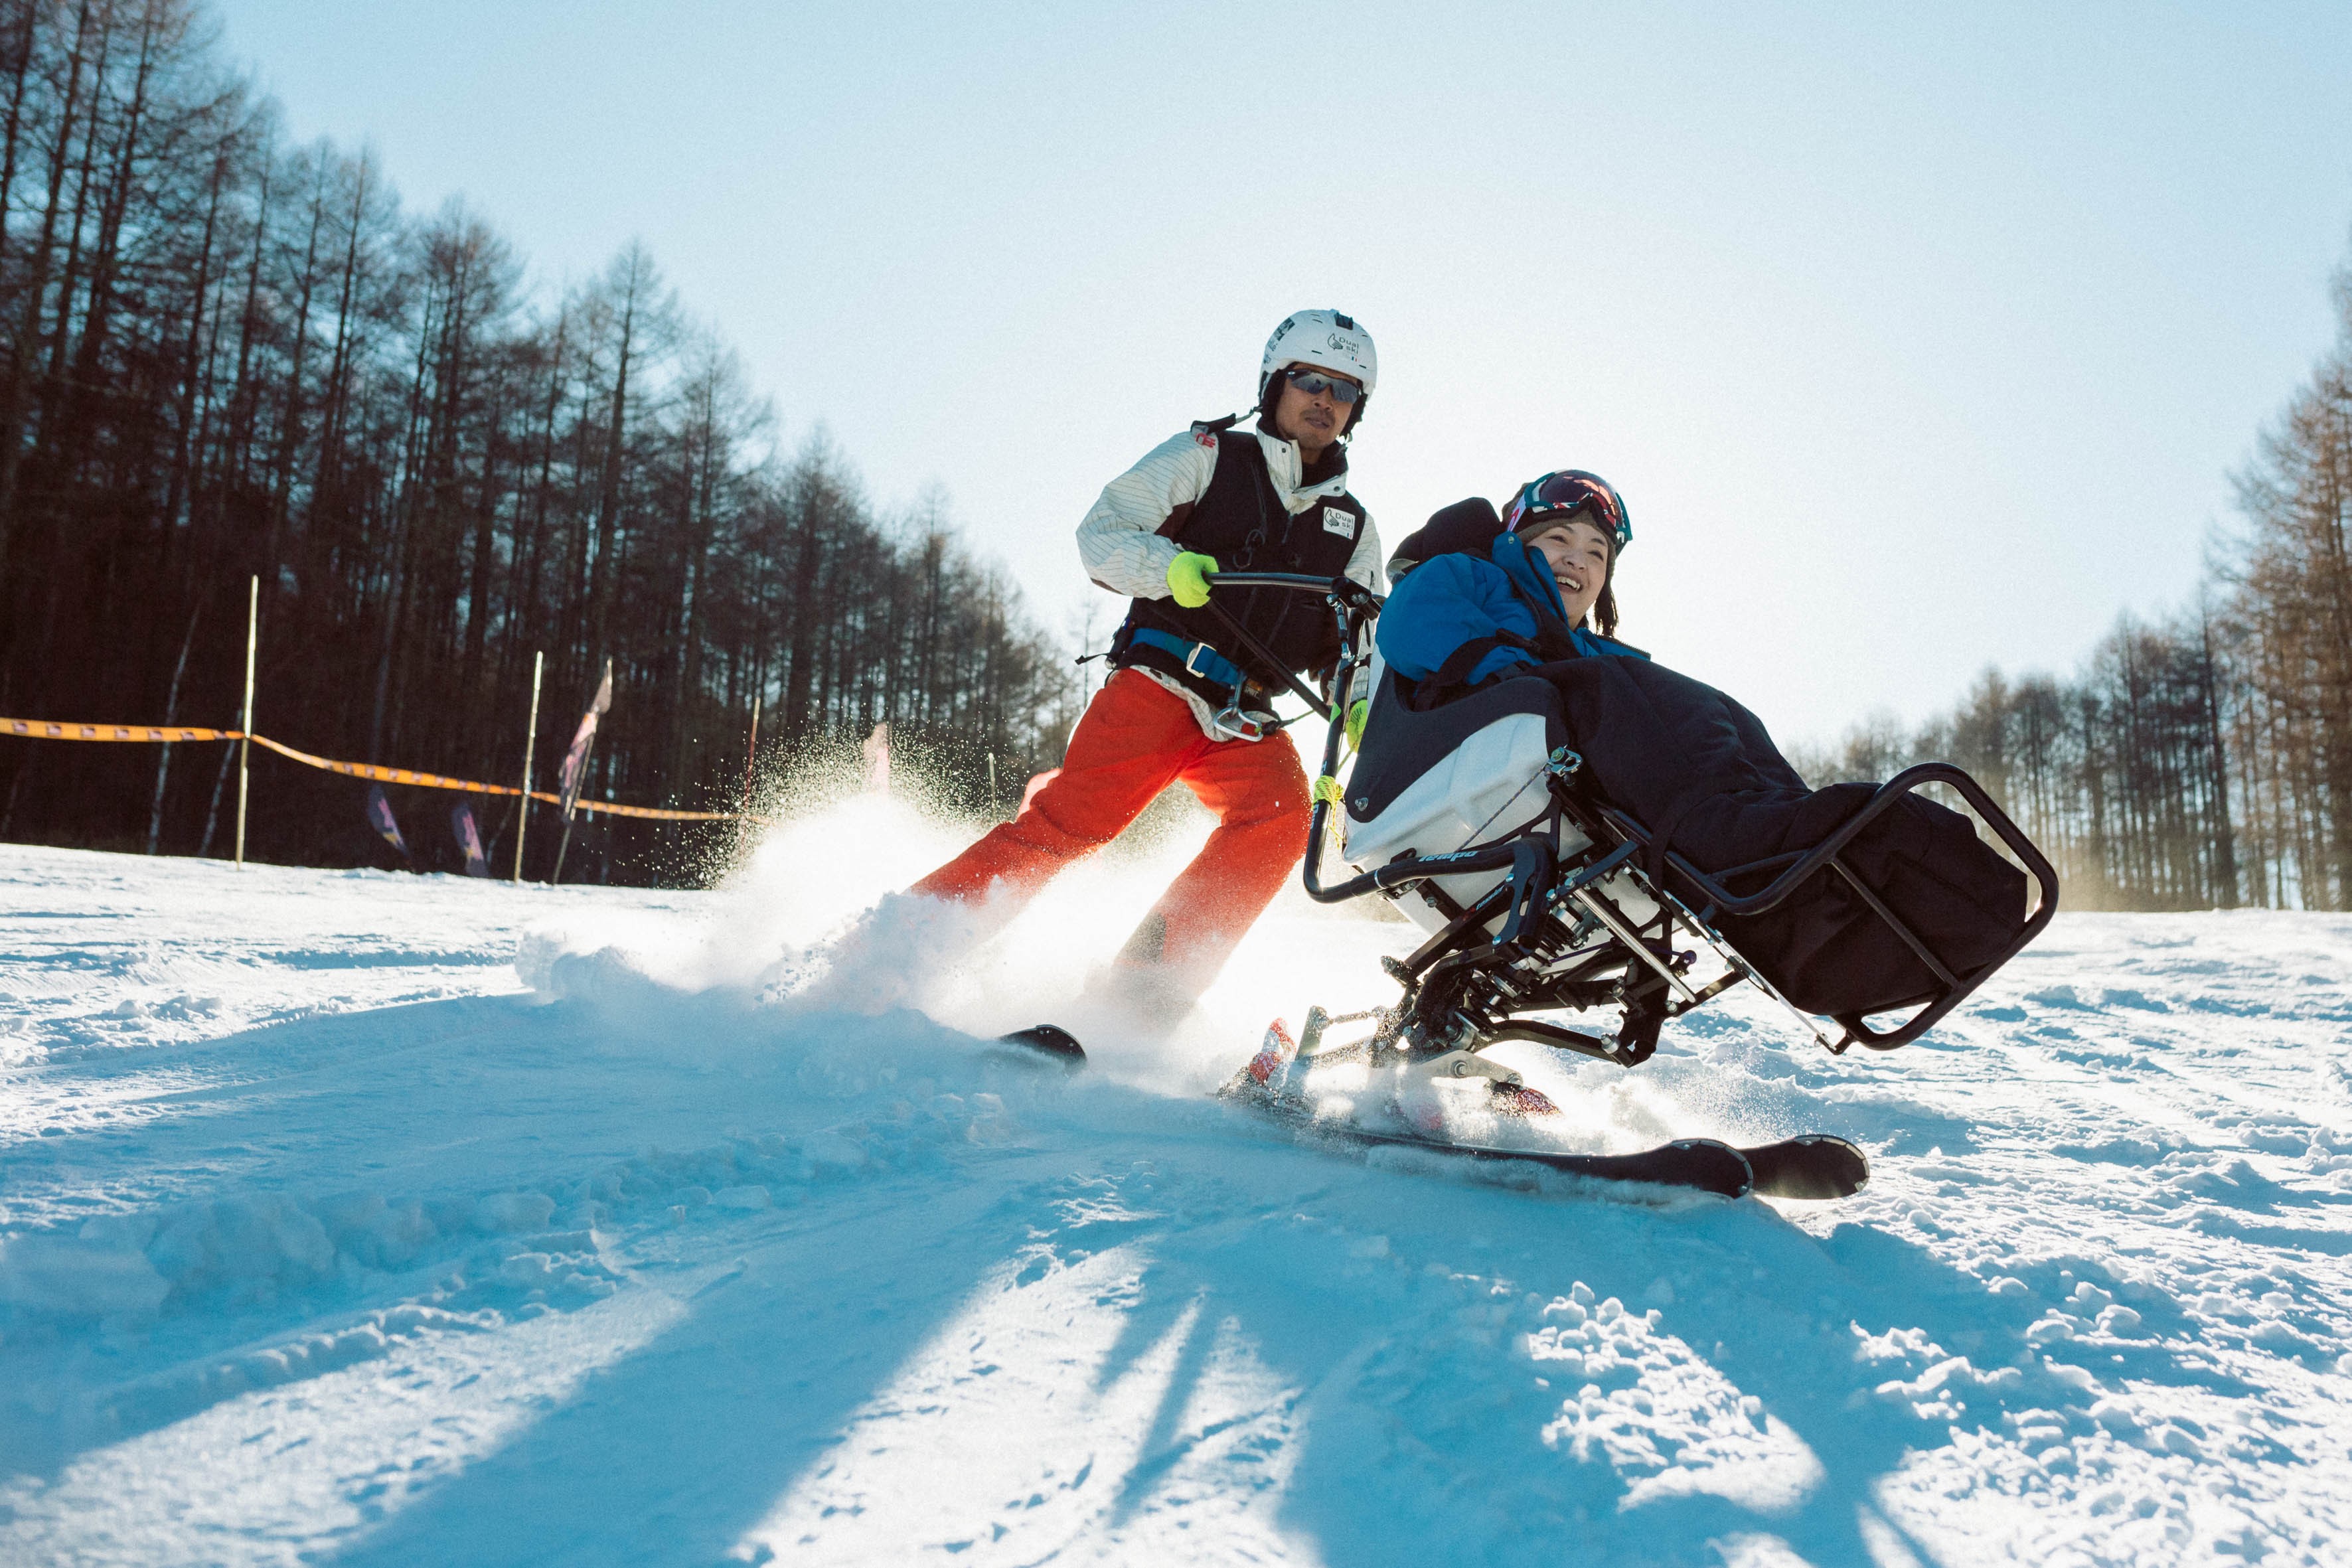 To promote ‘accessible tourism’, Japan Airlines has created unique travel experiences catering to those with special needs, such as its JAL Dual Ski tour, which enables those people with physical disabilities to enjoy the freedom and mobility of skiing.